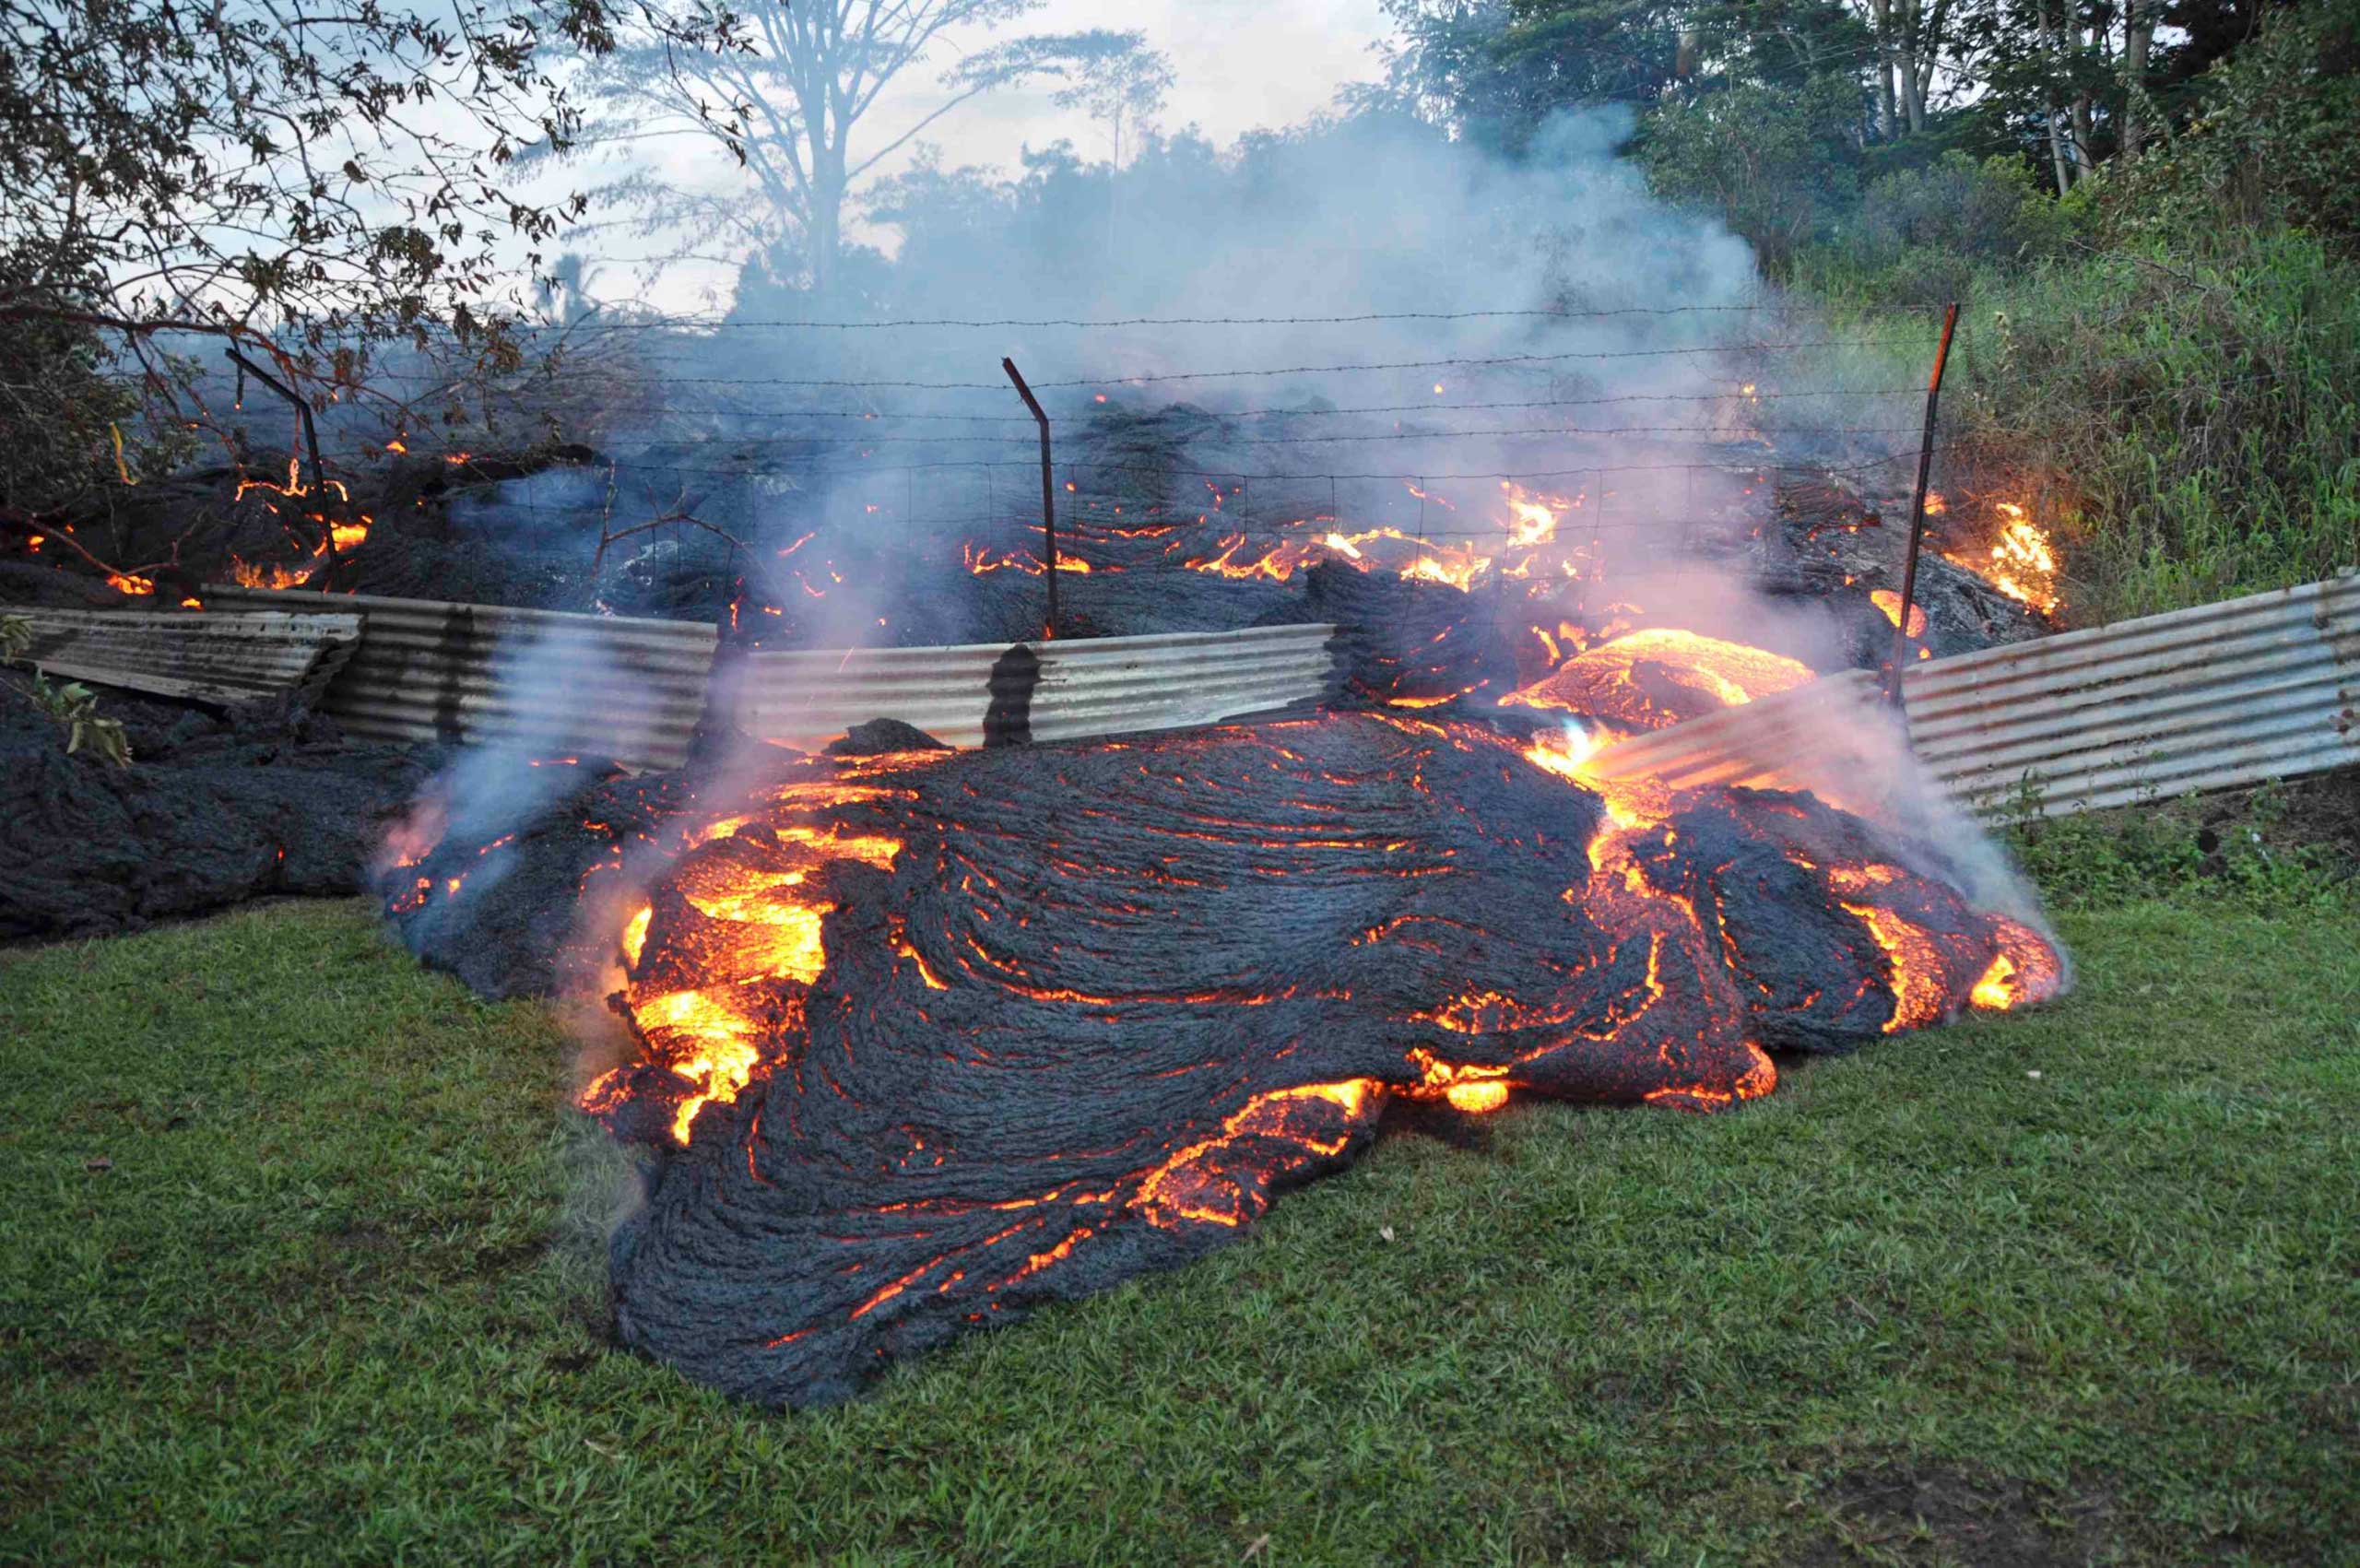 The lava flow from the Kilauea Volcano burns vegetation as it approaches a property boundary near the village of Pahoa, Hawaii, on Oct. 28, 2014. (US Geological Survey—Reuters)